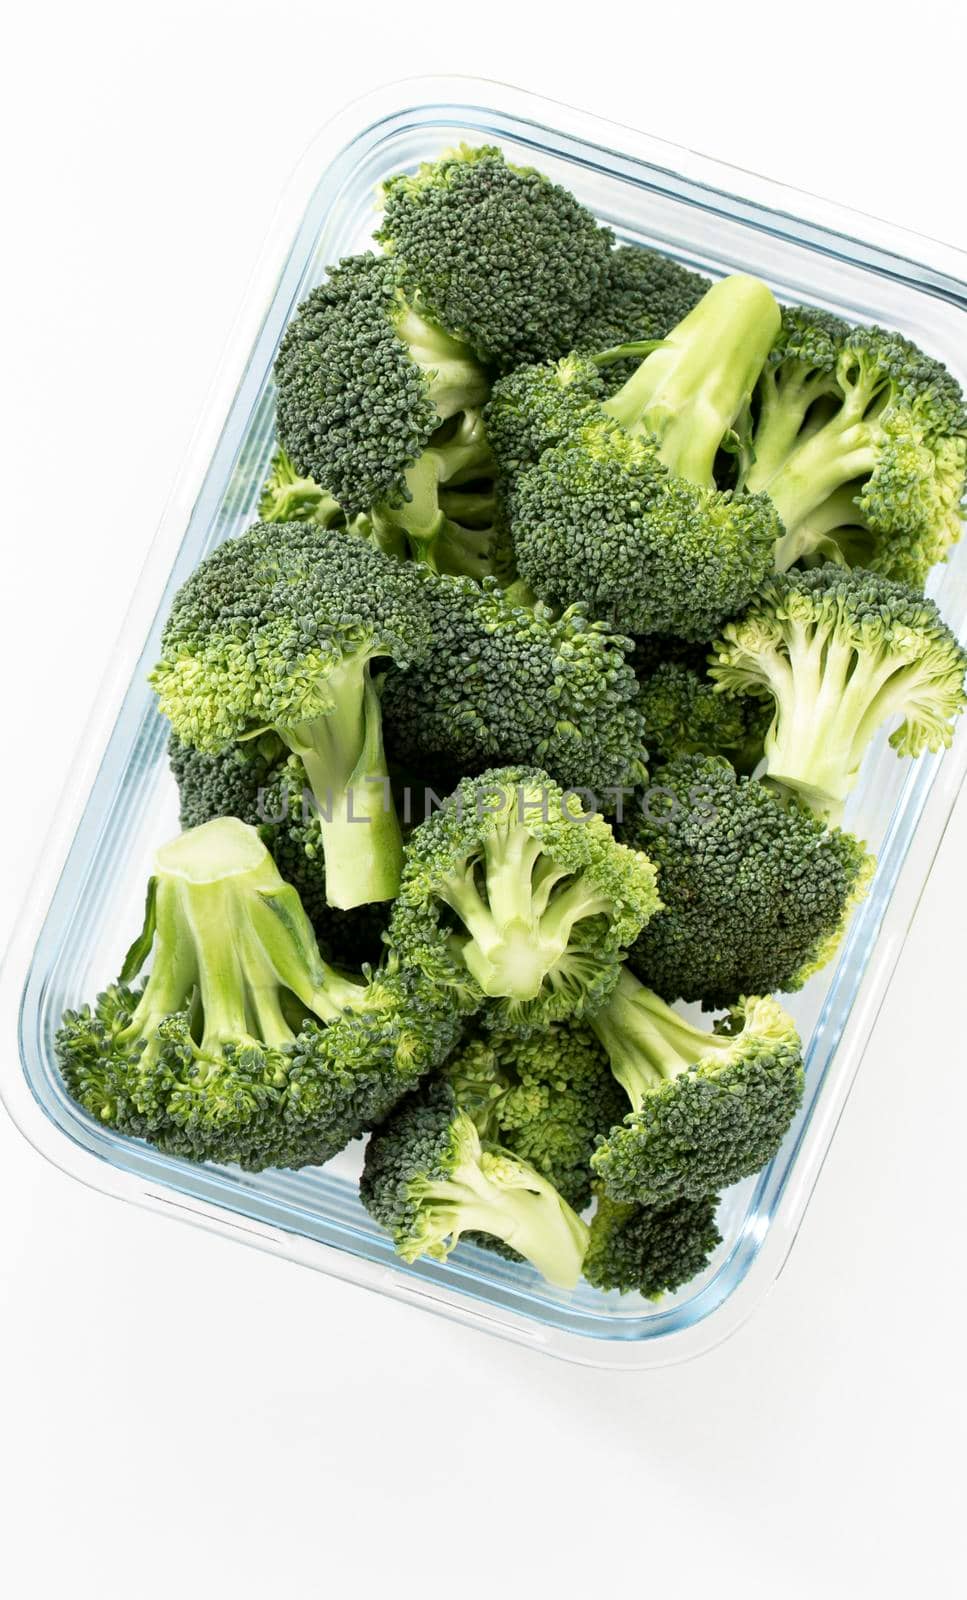 Washed And Sliced Broccoli Crown In Glass Container.
Organic broccoli, cut up and ready to be used in cooking.